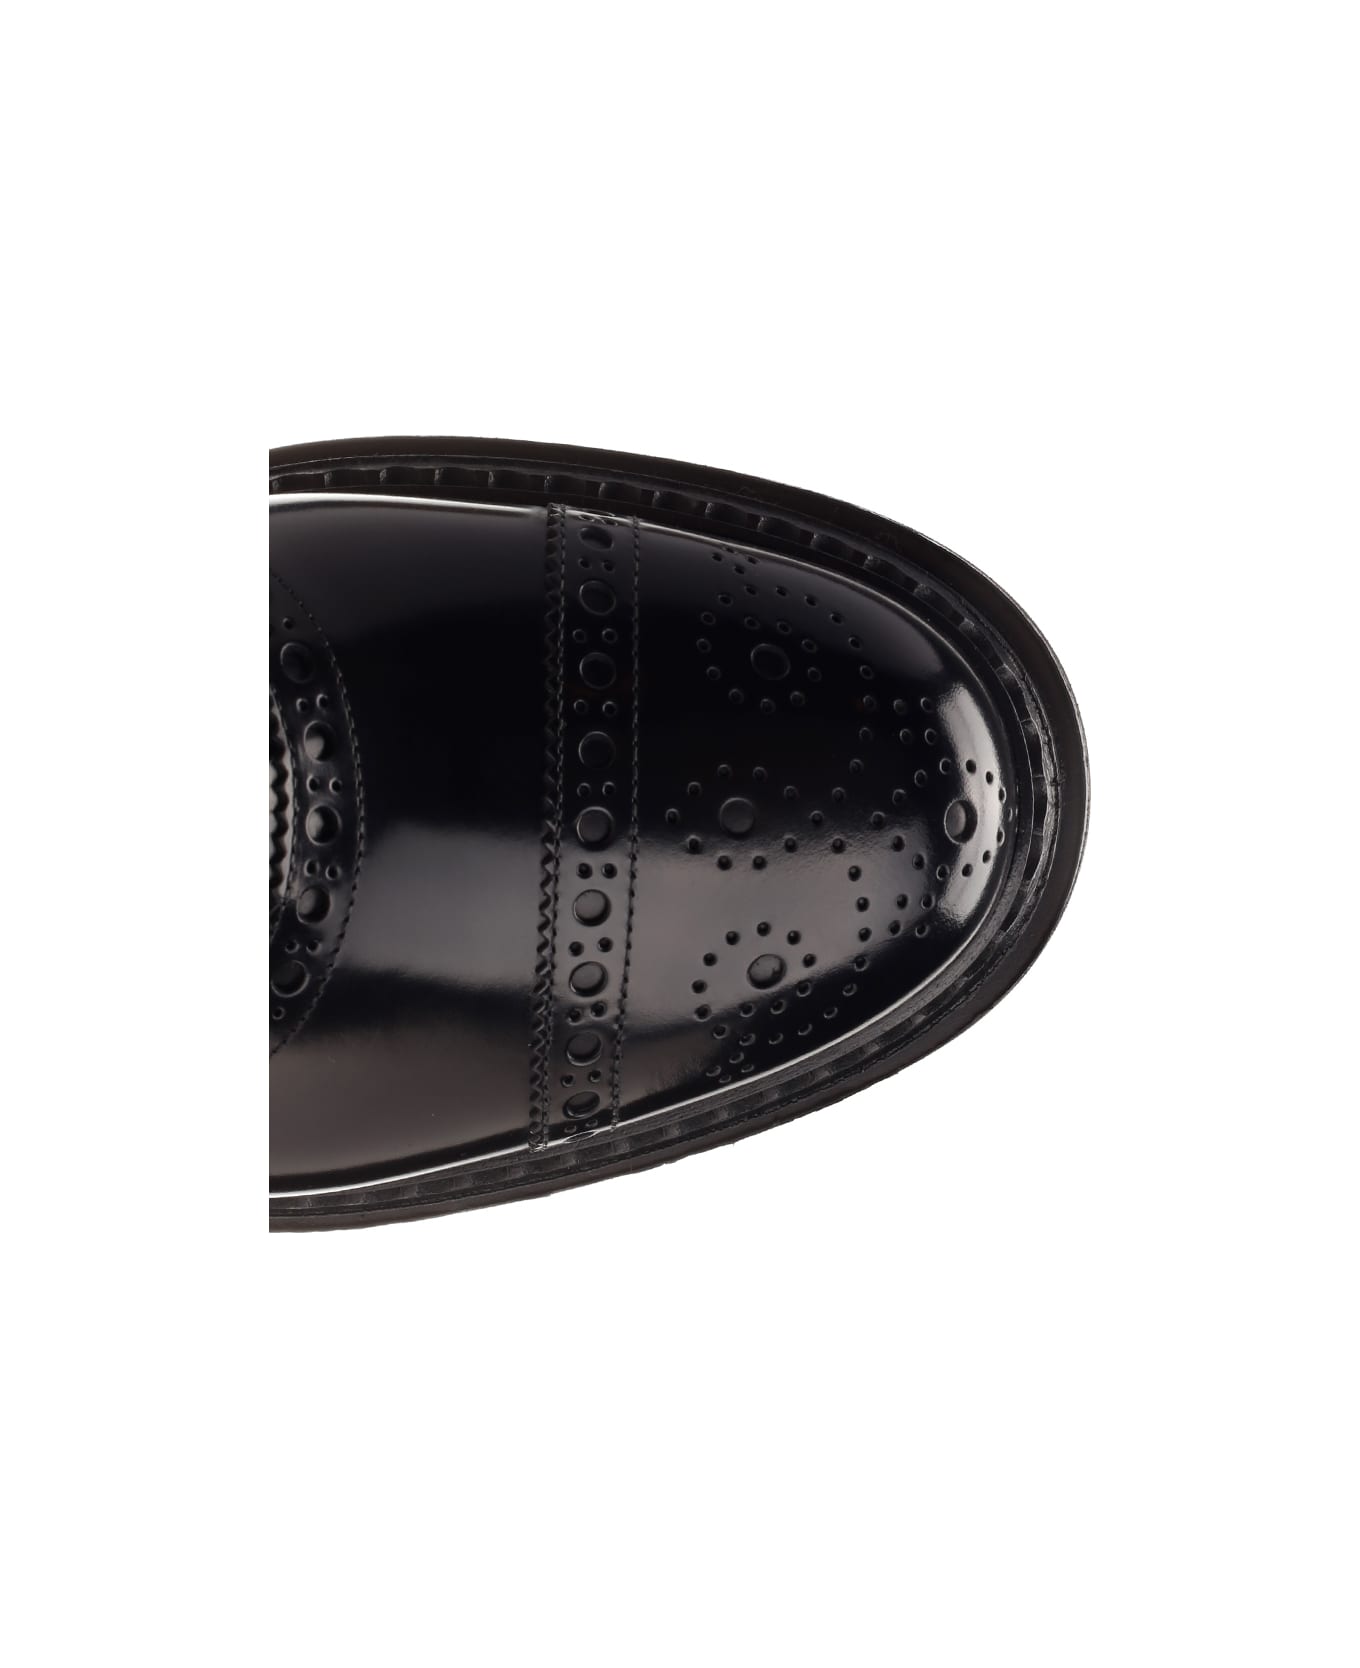 Dolce & Gabbana Leather Oxford Shoes - Nero